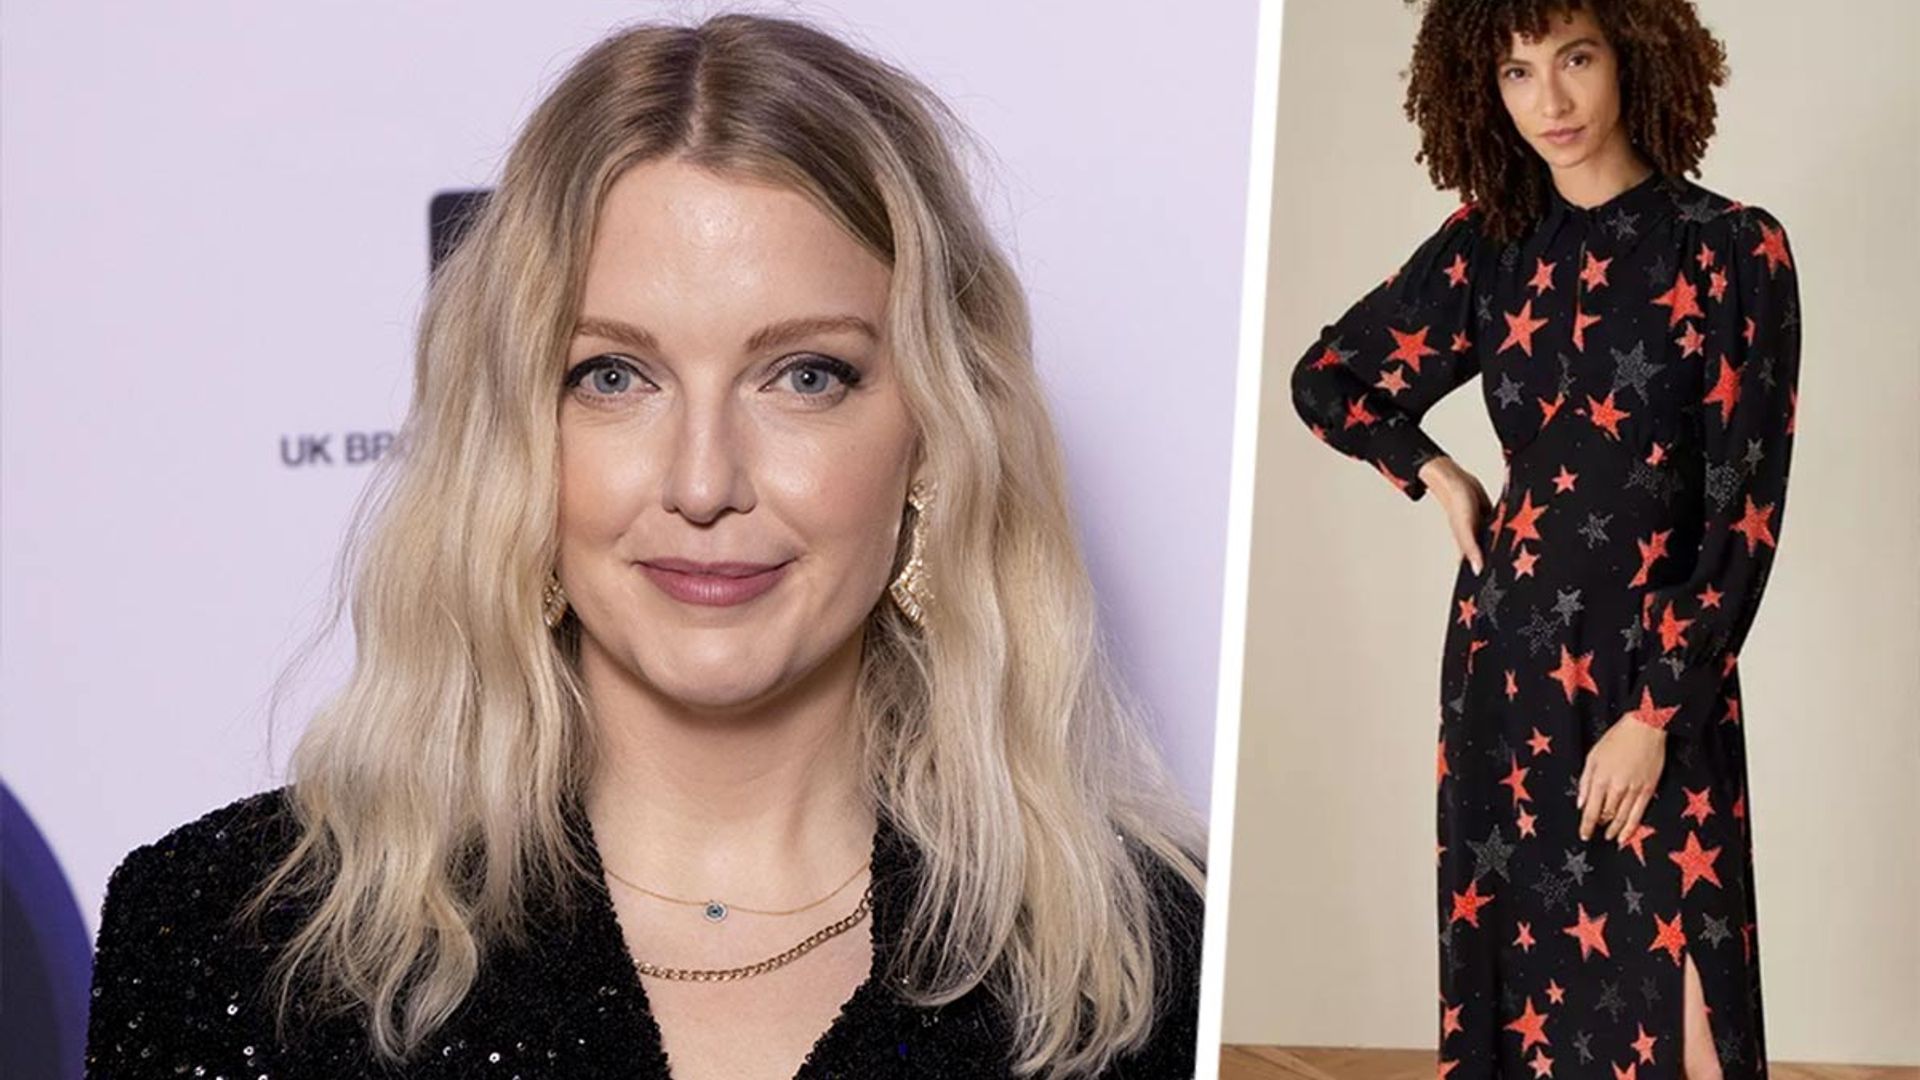 The One Show fans went starry-eyed over Lauren Laverne's star-print dress